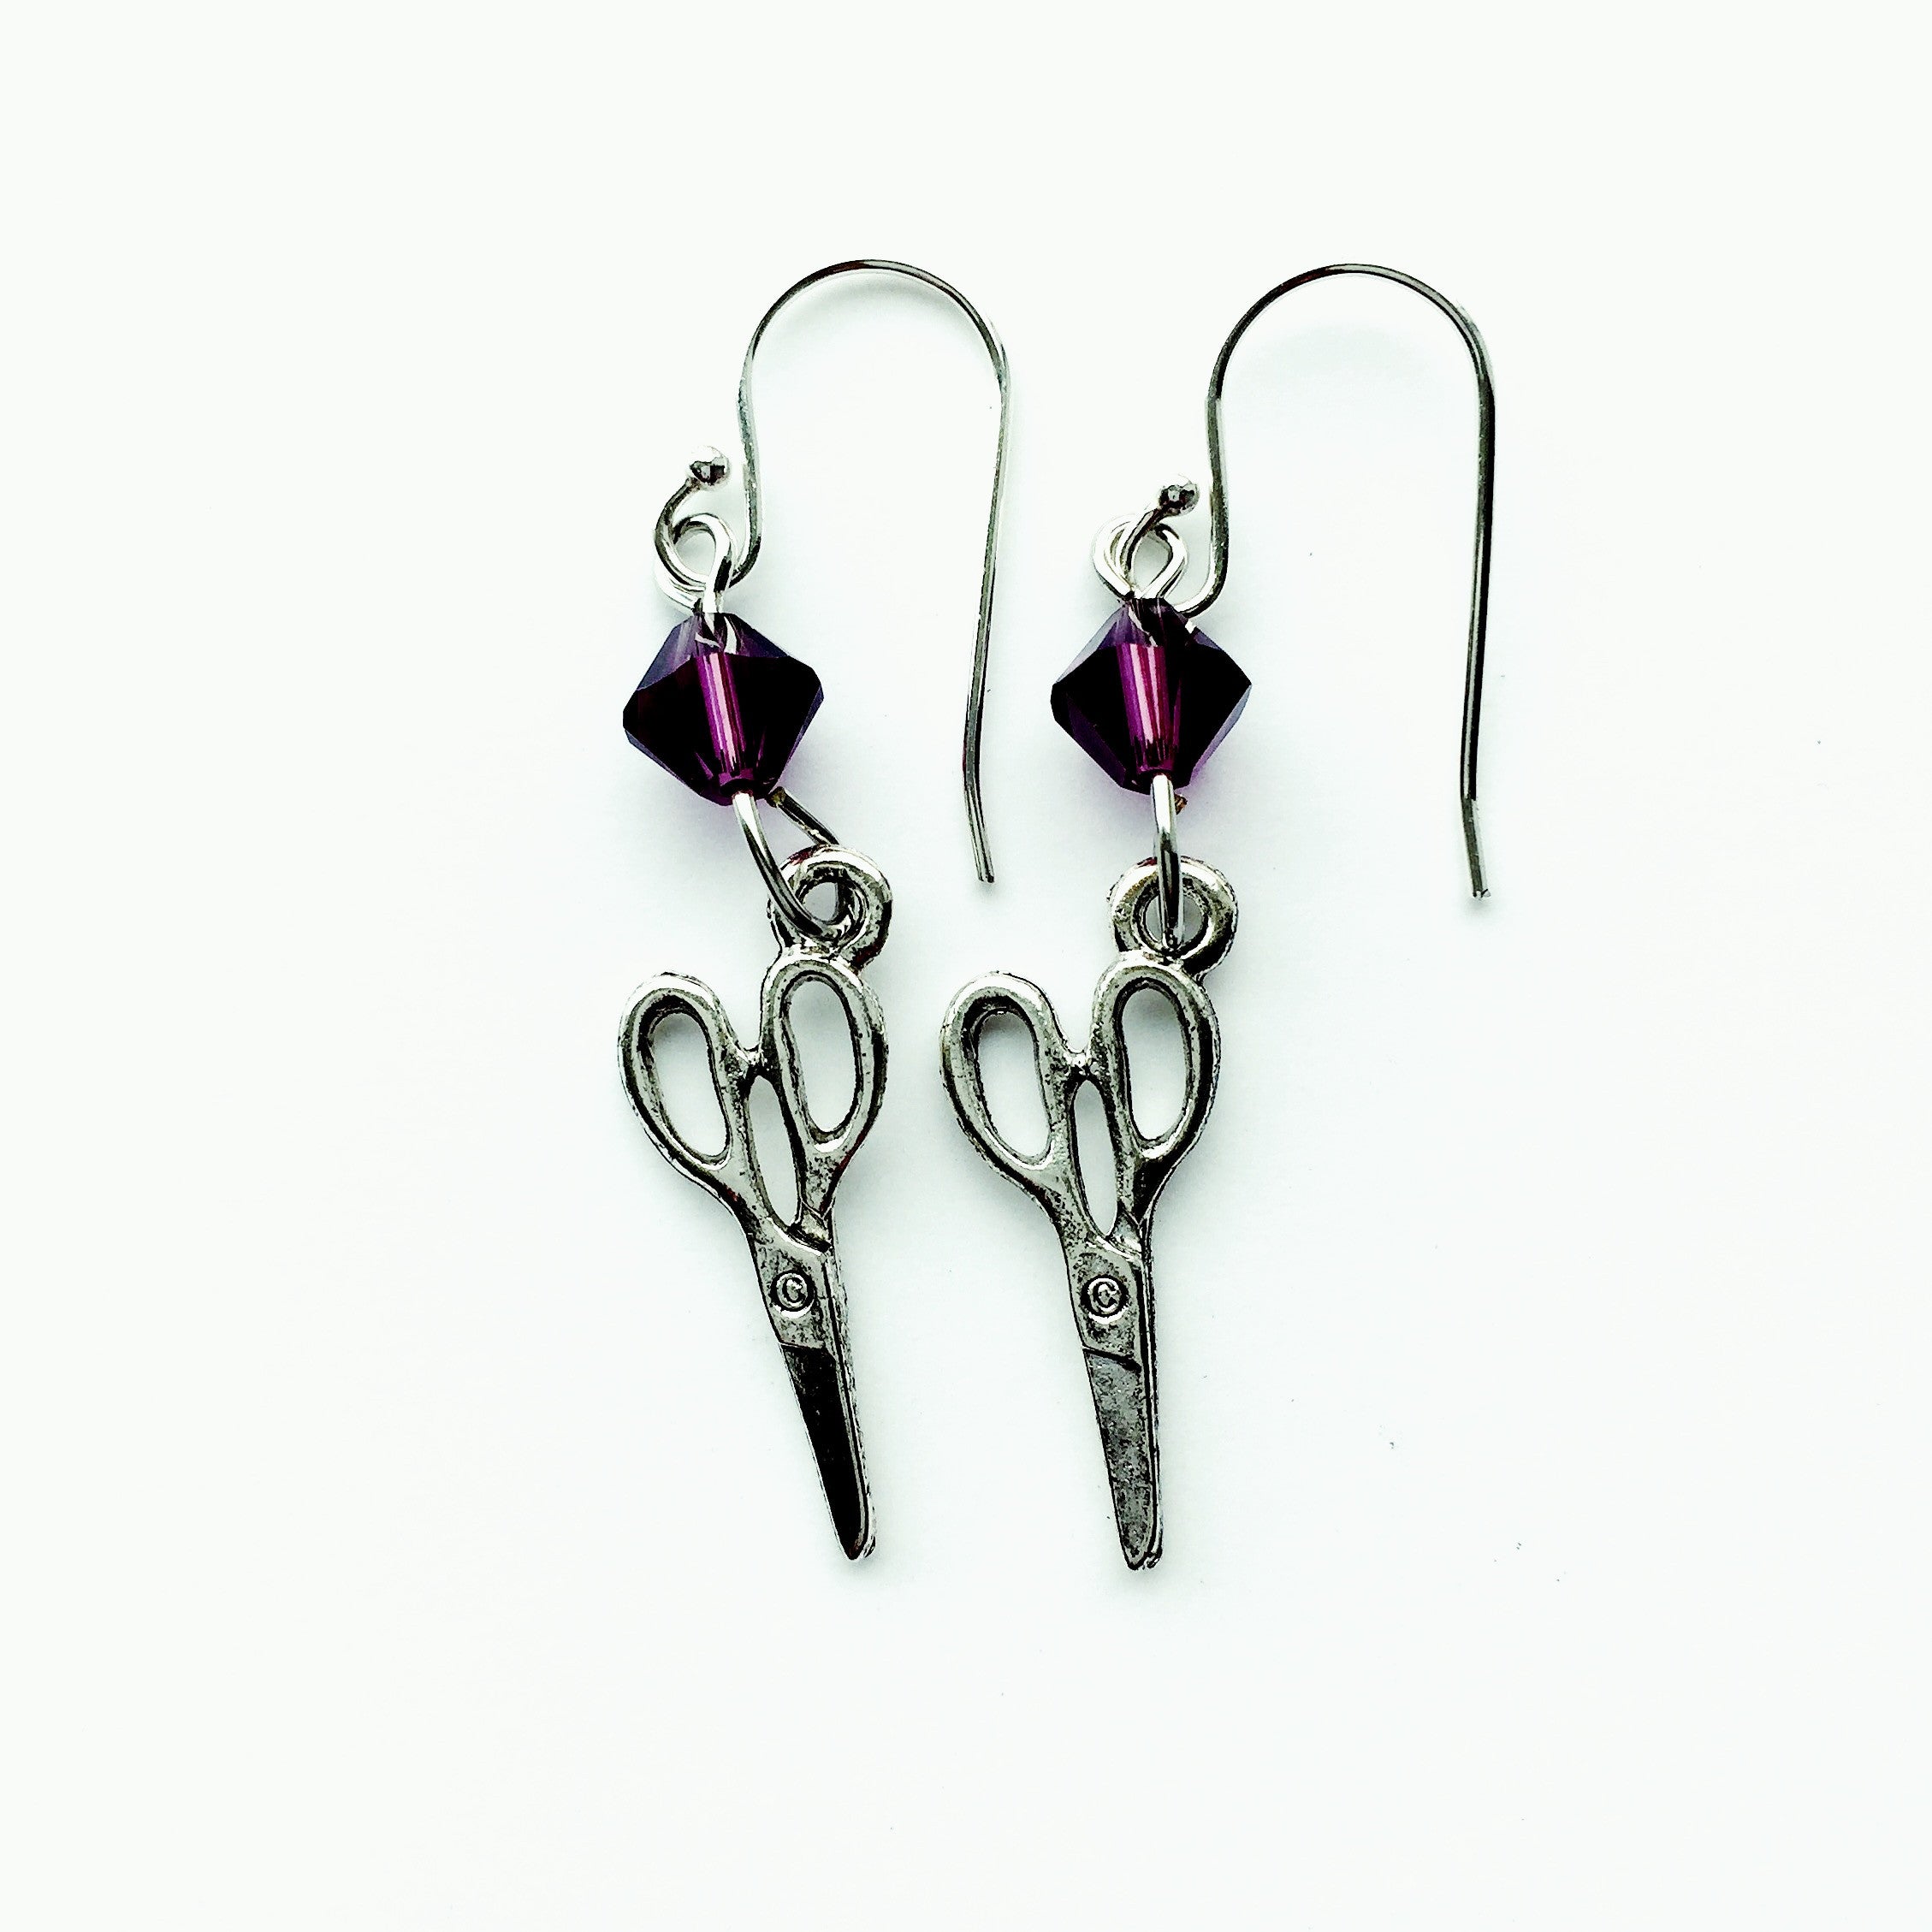 ____ Craft Scissors Silver Earrings with Purple Swarovski Crystals